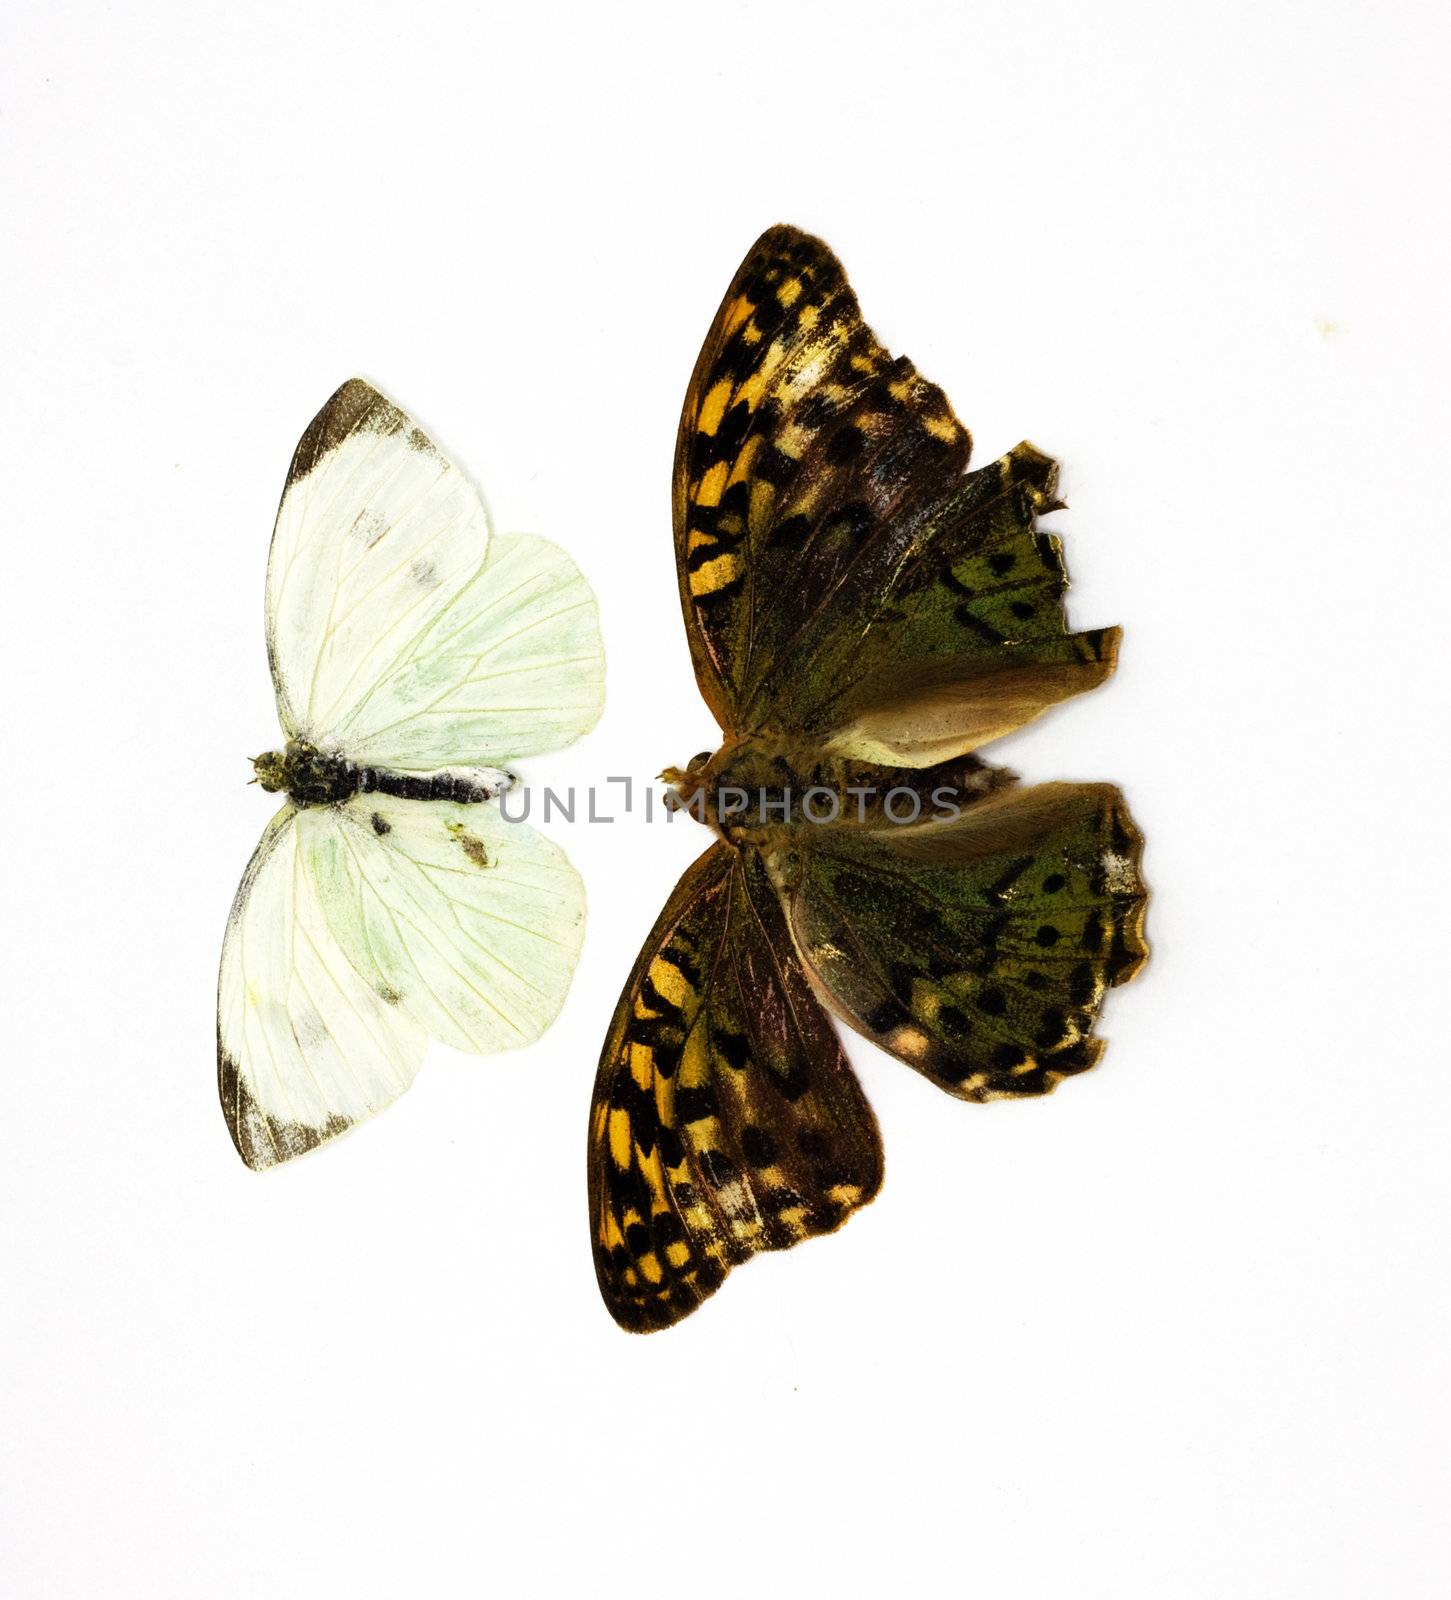 Two beautiful tropical butterflies insulated in white by schankz